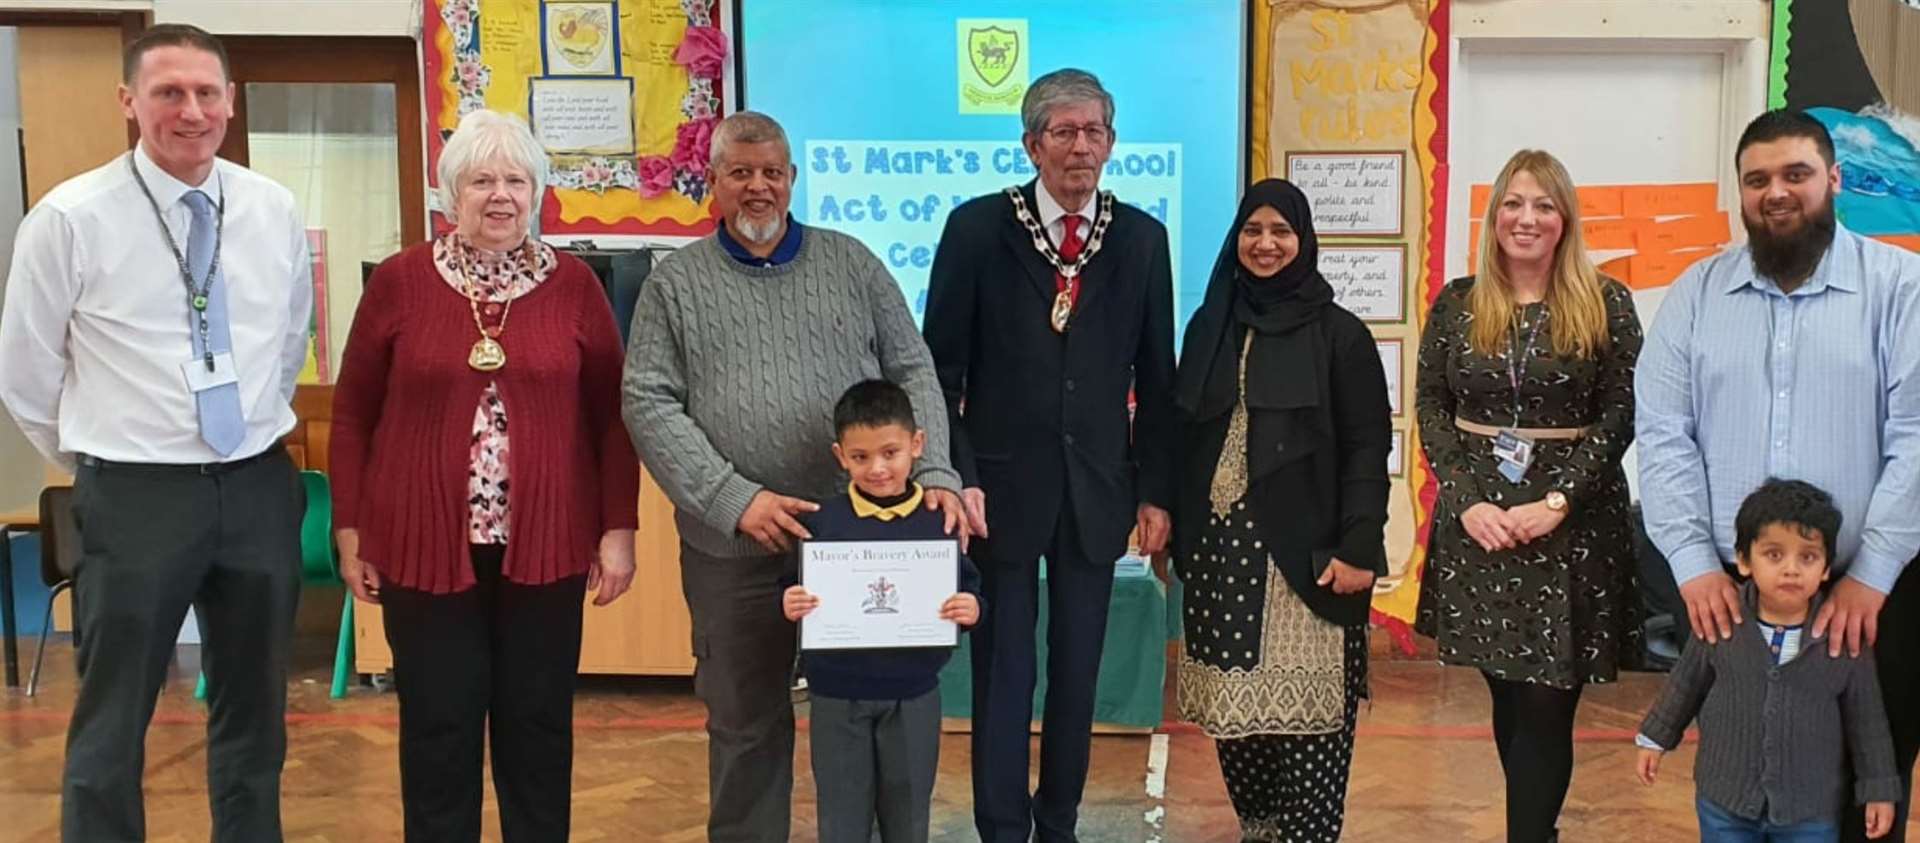 Yusuf received his bravery award at school from the Mayor of Tunbridge Wells